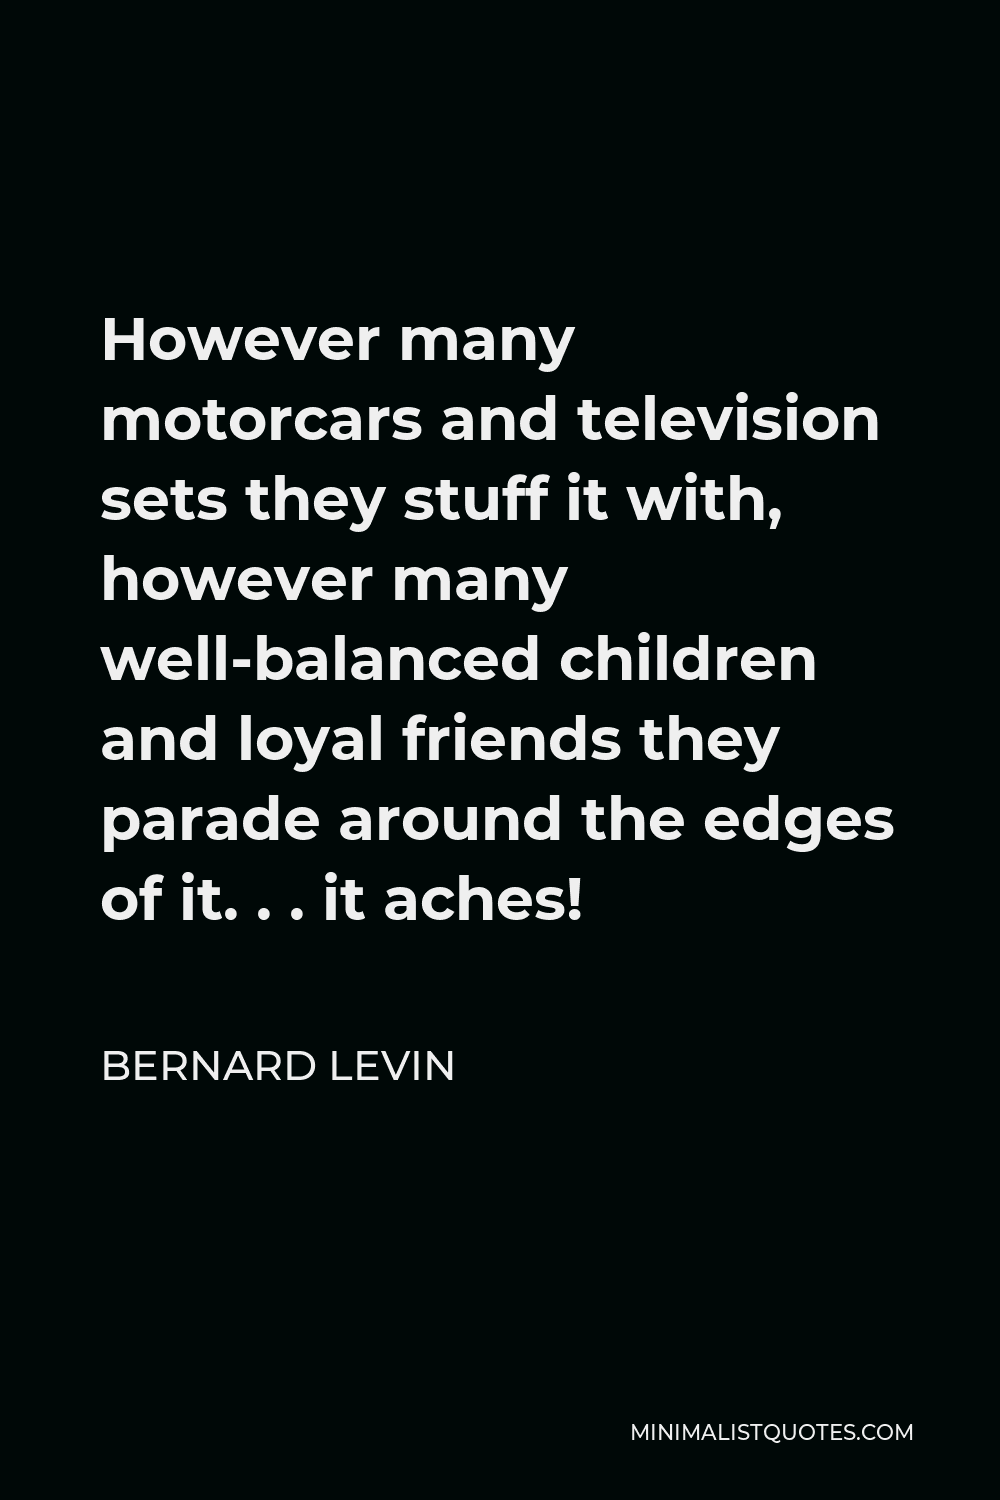 Bernard Levin Quote - However many motorcars and television sets they stuff it with, however many well-balanced children and loyal friends they parade around the edges of it. . . it aches!